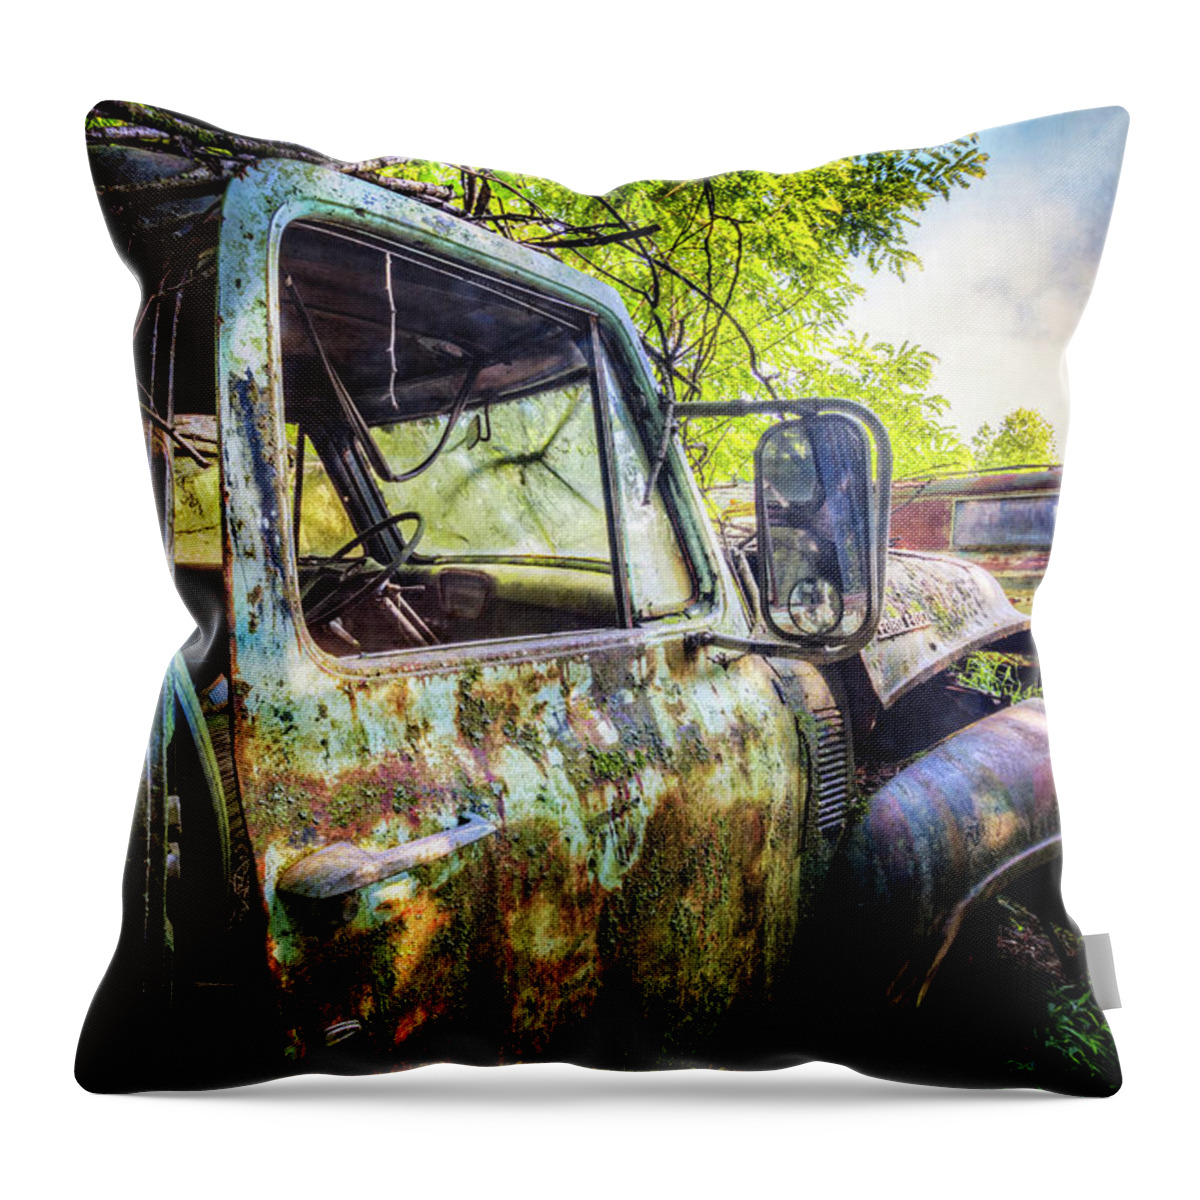 100 Throw Pillow featuring the photograph Rusty Old Ford Truck by Debra and Dave Vanderlaan